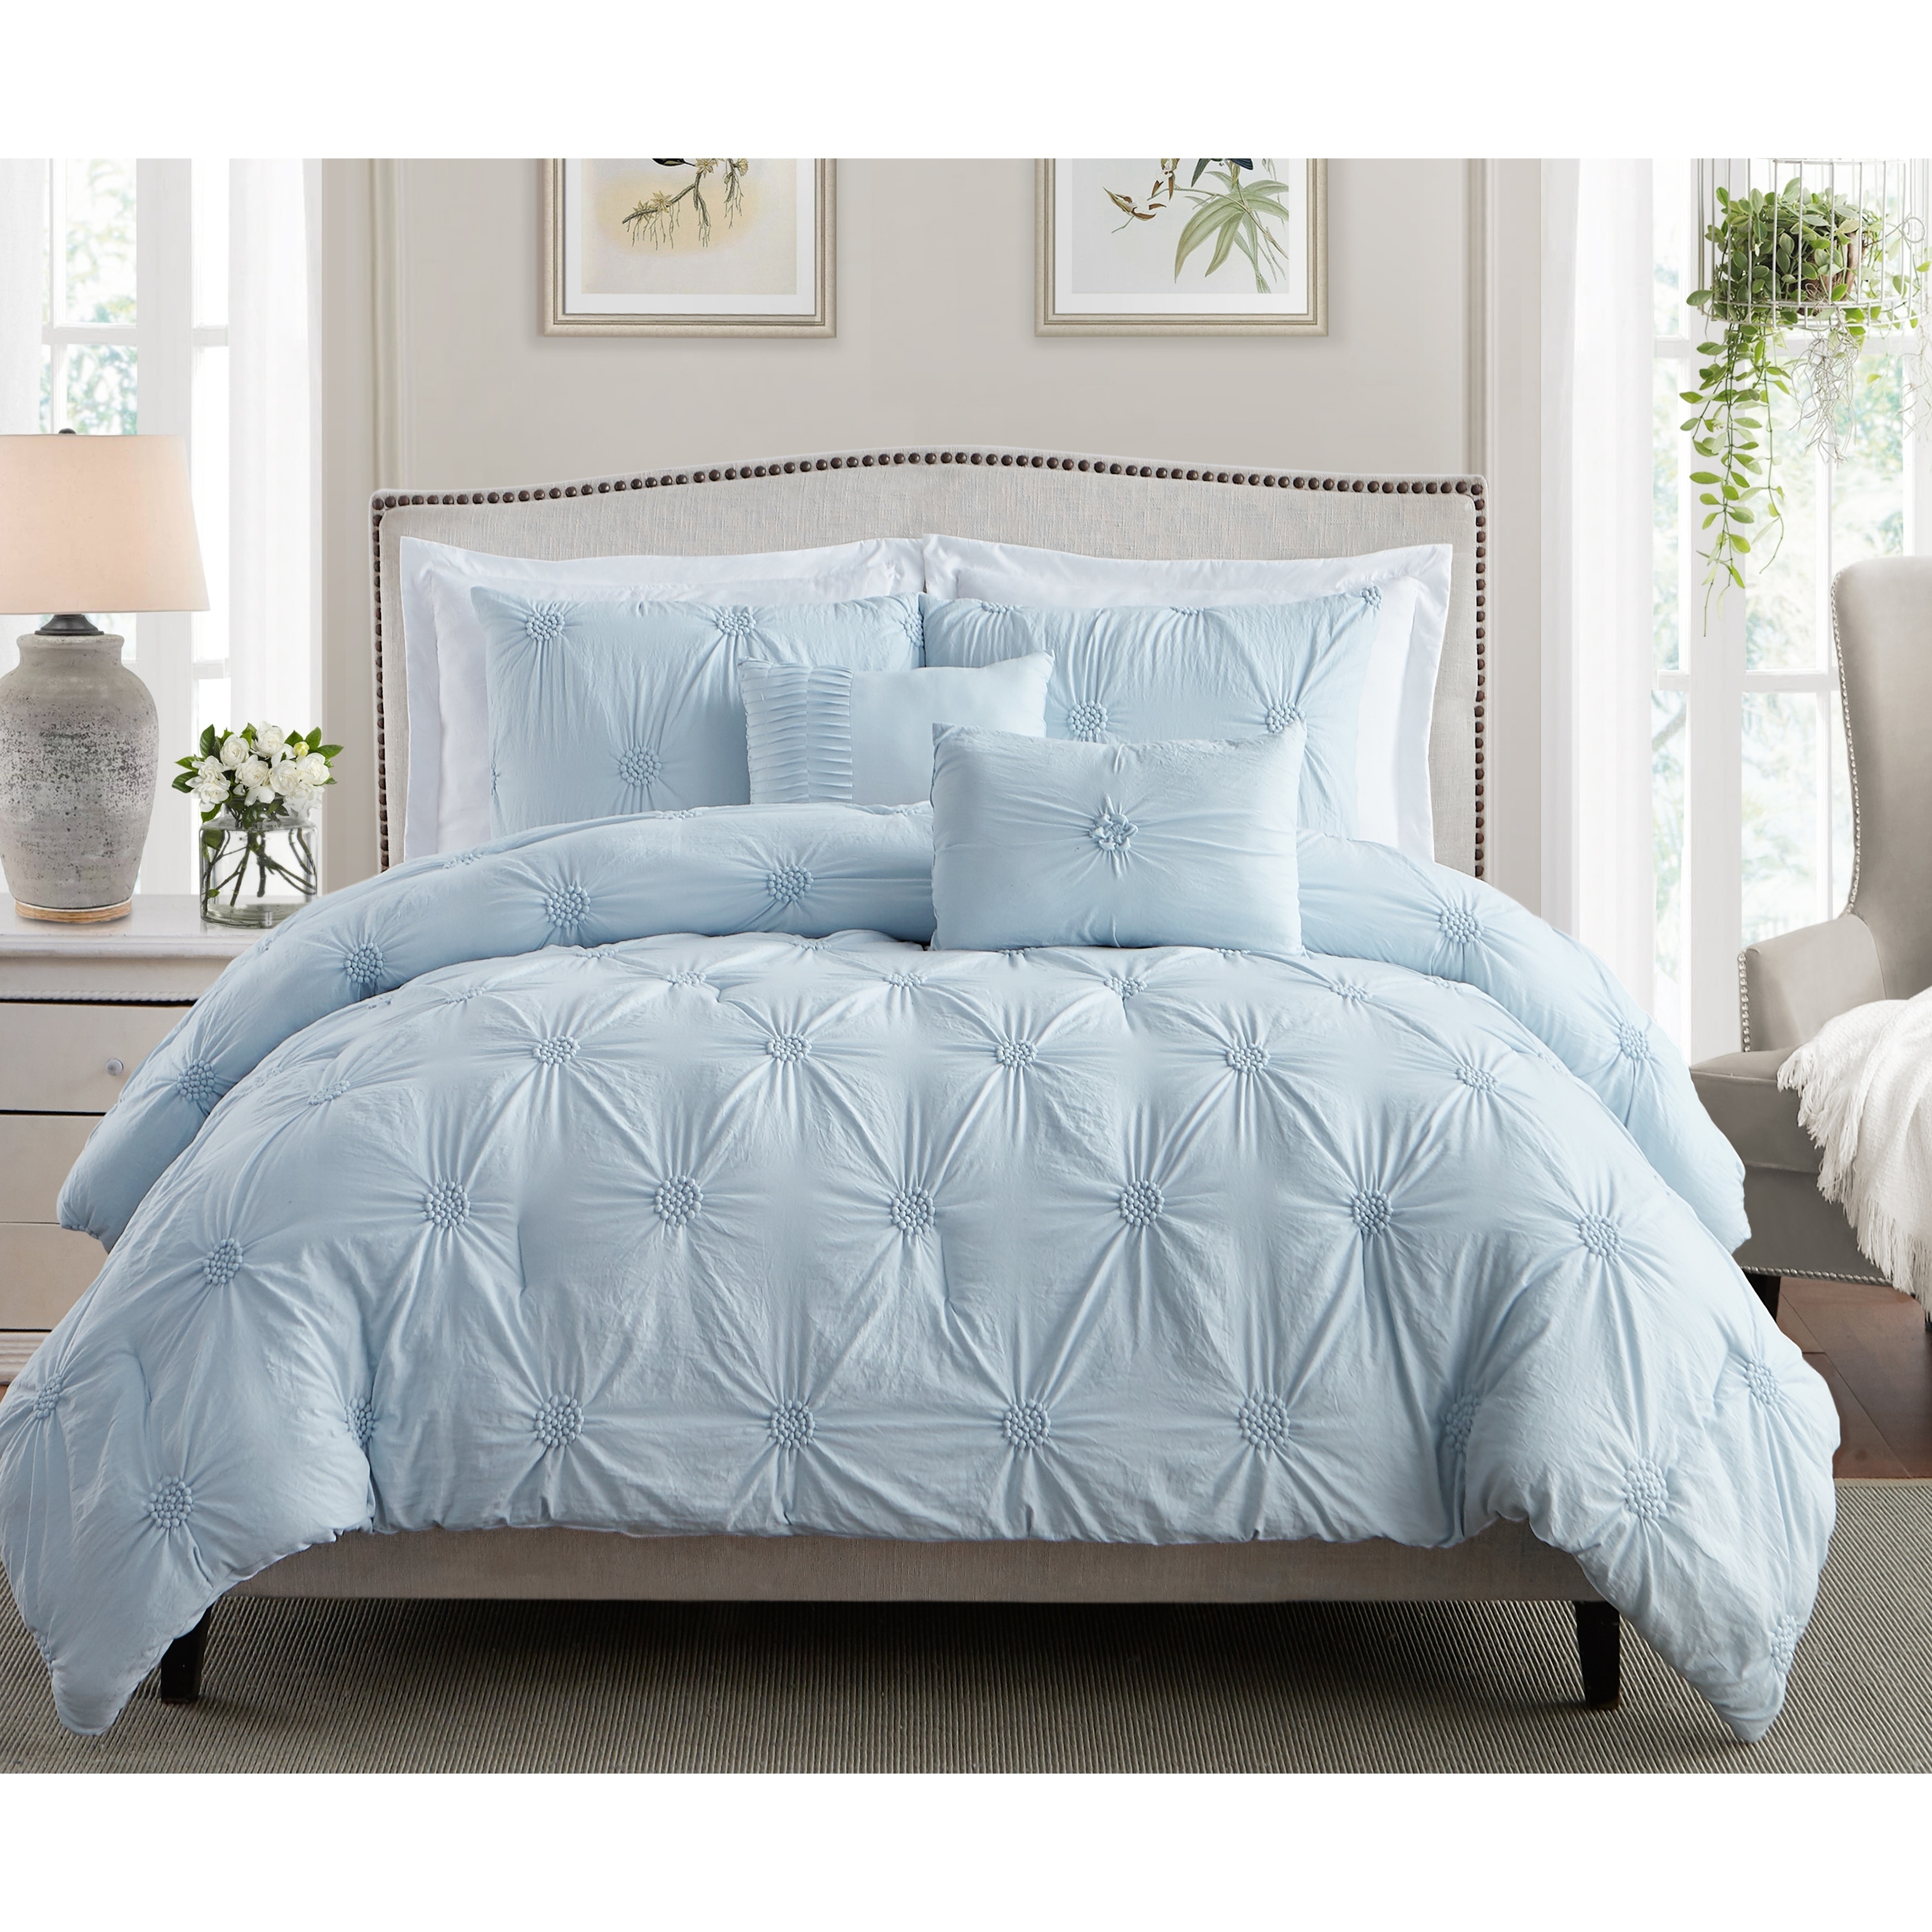 soft touch baby comforter